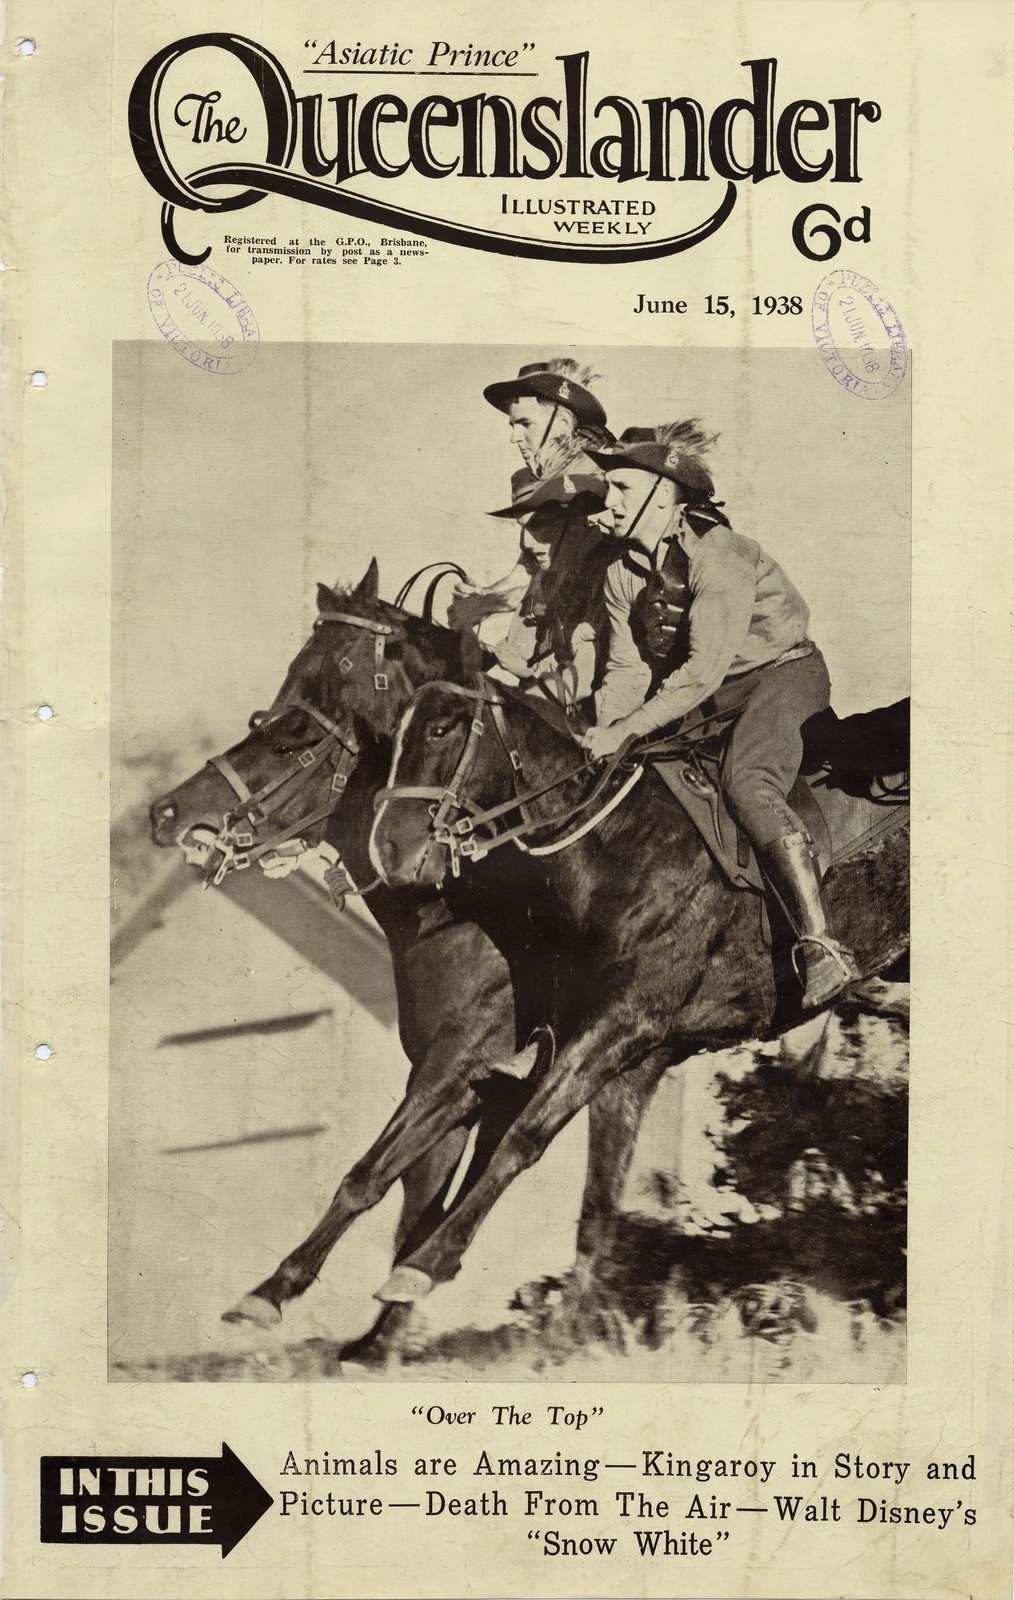 Illustrated front cover from The Queenslander June 151938